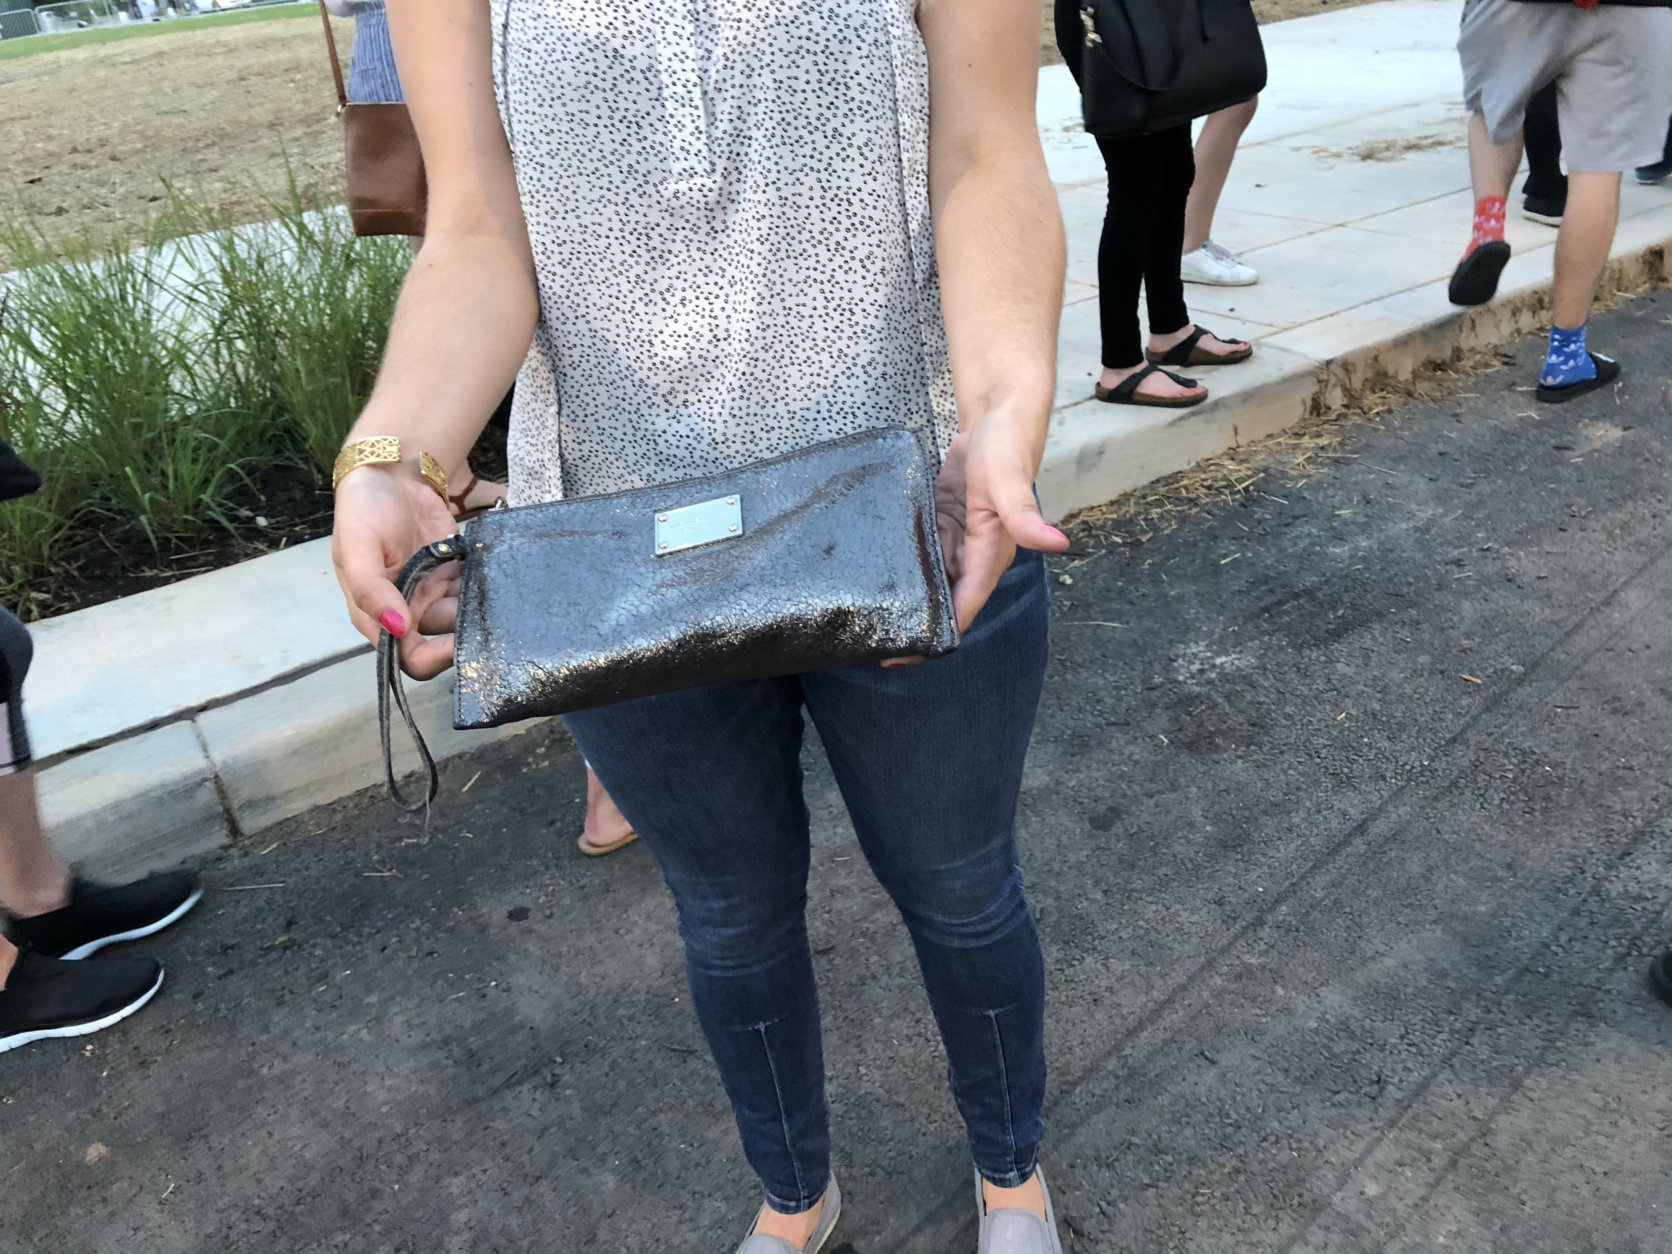 This type of purse must be stored in lockers at Audi Field during a D.C. United game on Saturday, July 28, 2018. (WTOP/Mike McMearty)